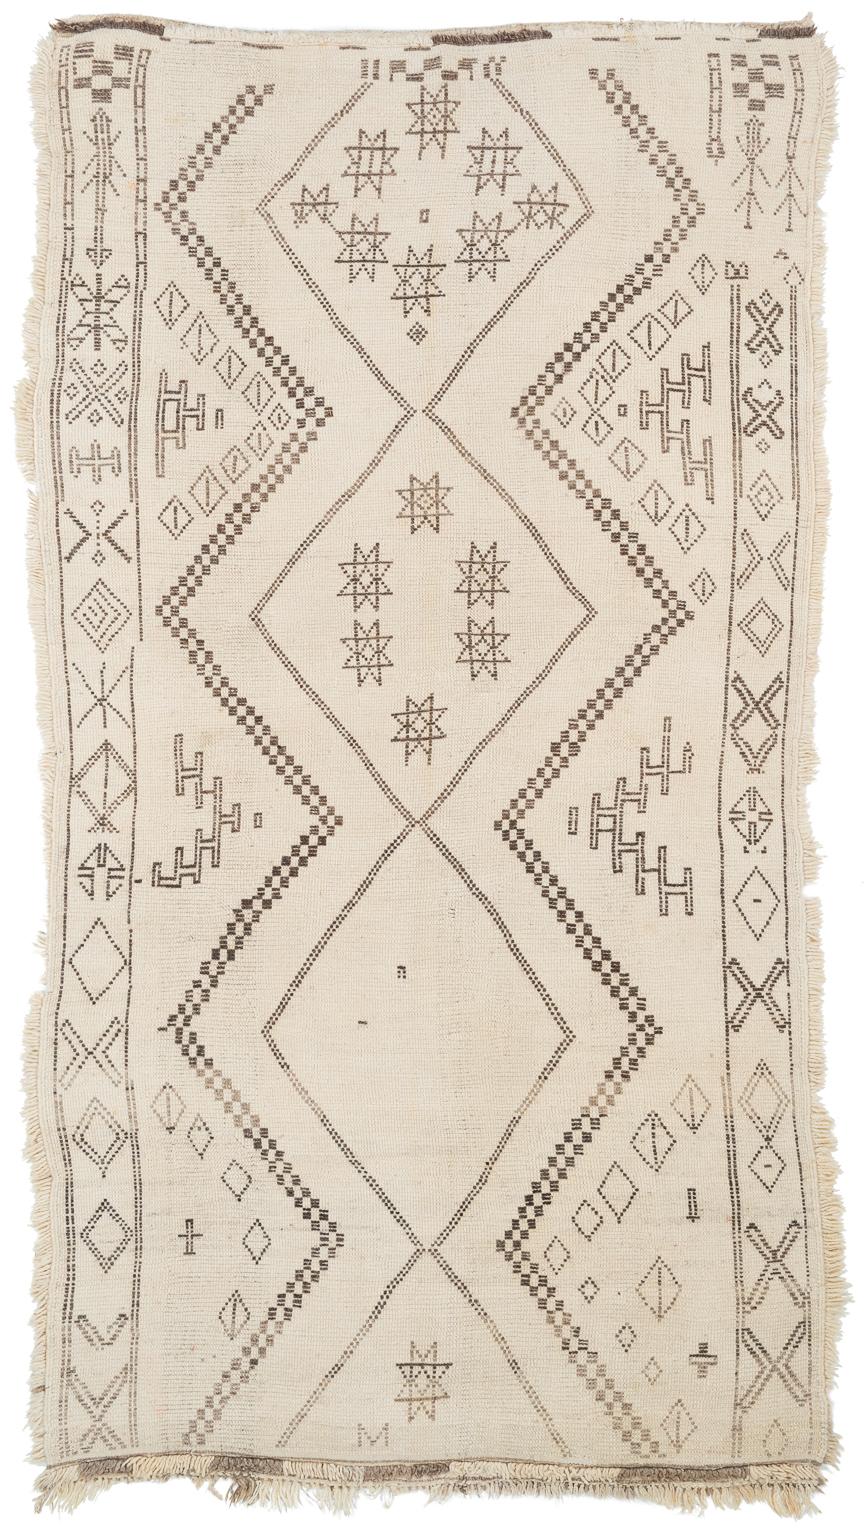 Unusual white ground beni mguild carpet from the middle atlas mountains in morocco. Woven with beautiful handspun wool and has a really terrific dynamic Traditional Design from 1950s. Measures: 6' x 10'5